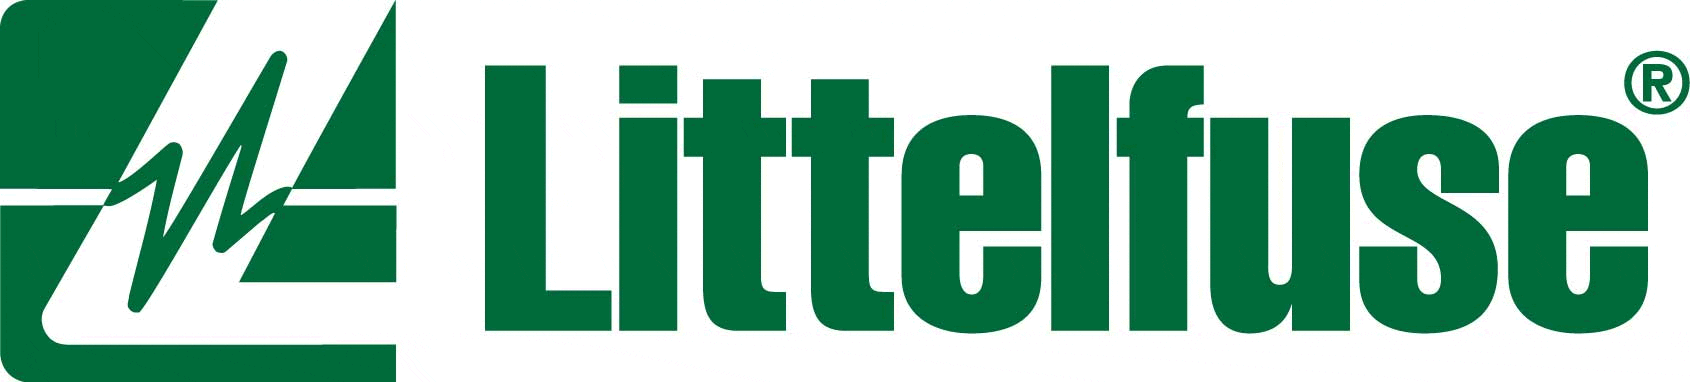 The littlefuse logo on a white background.